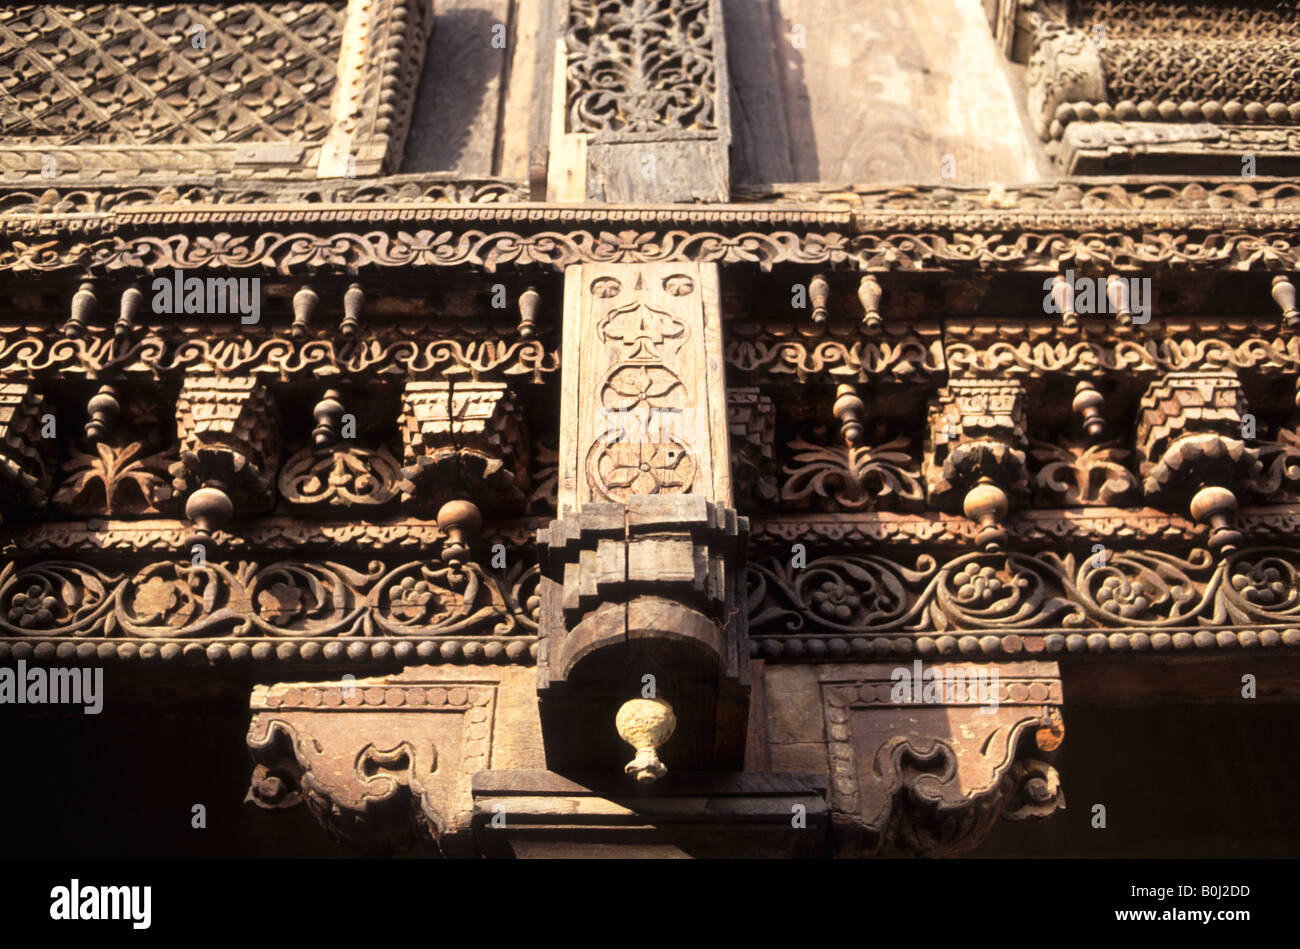 Details of a carved Sandalwood wall (local art museum), Agra IN Stock Photo